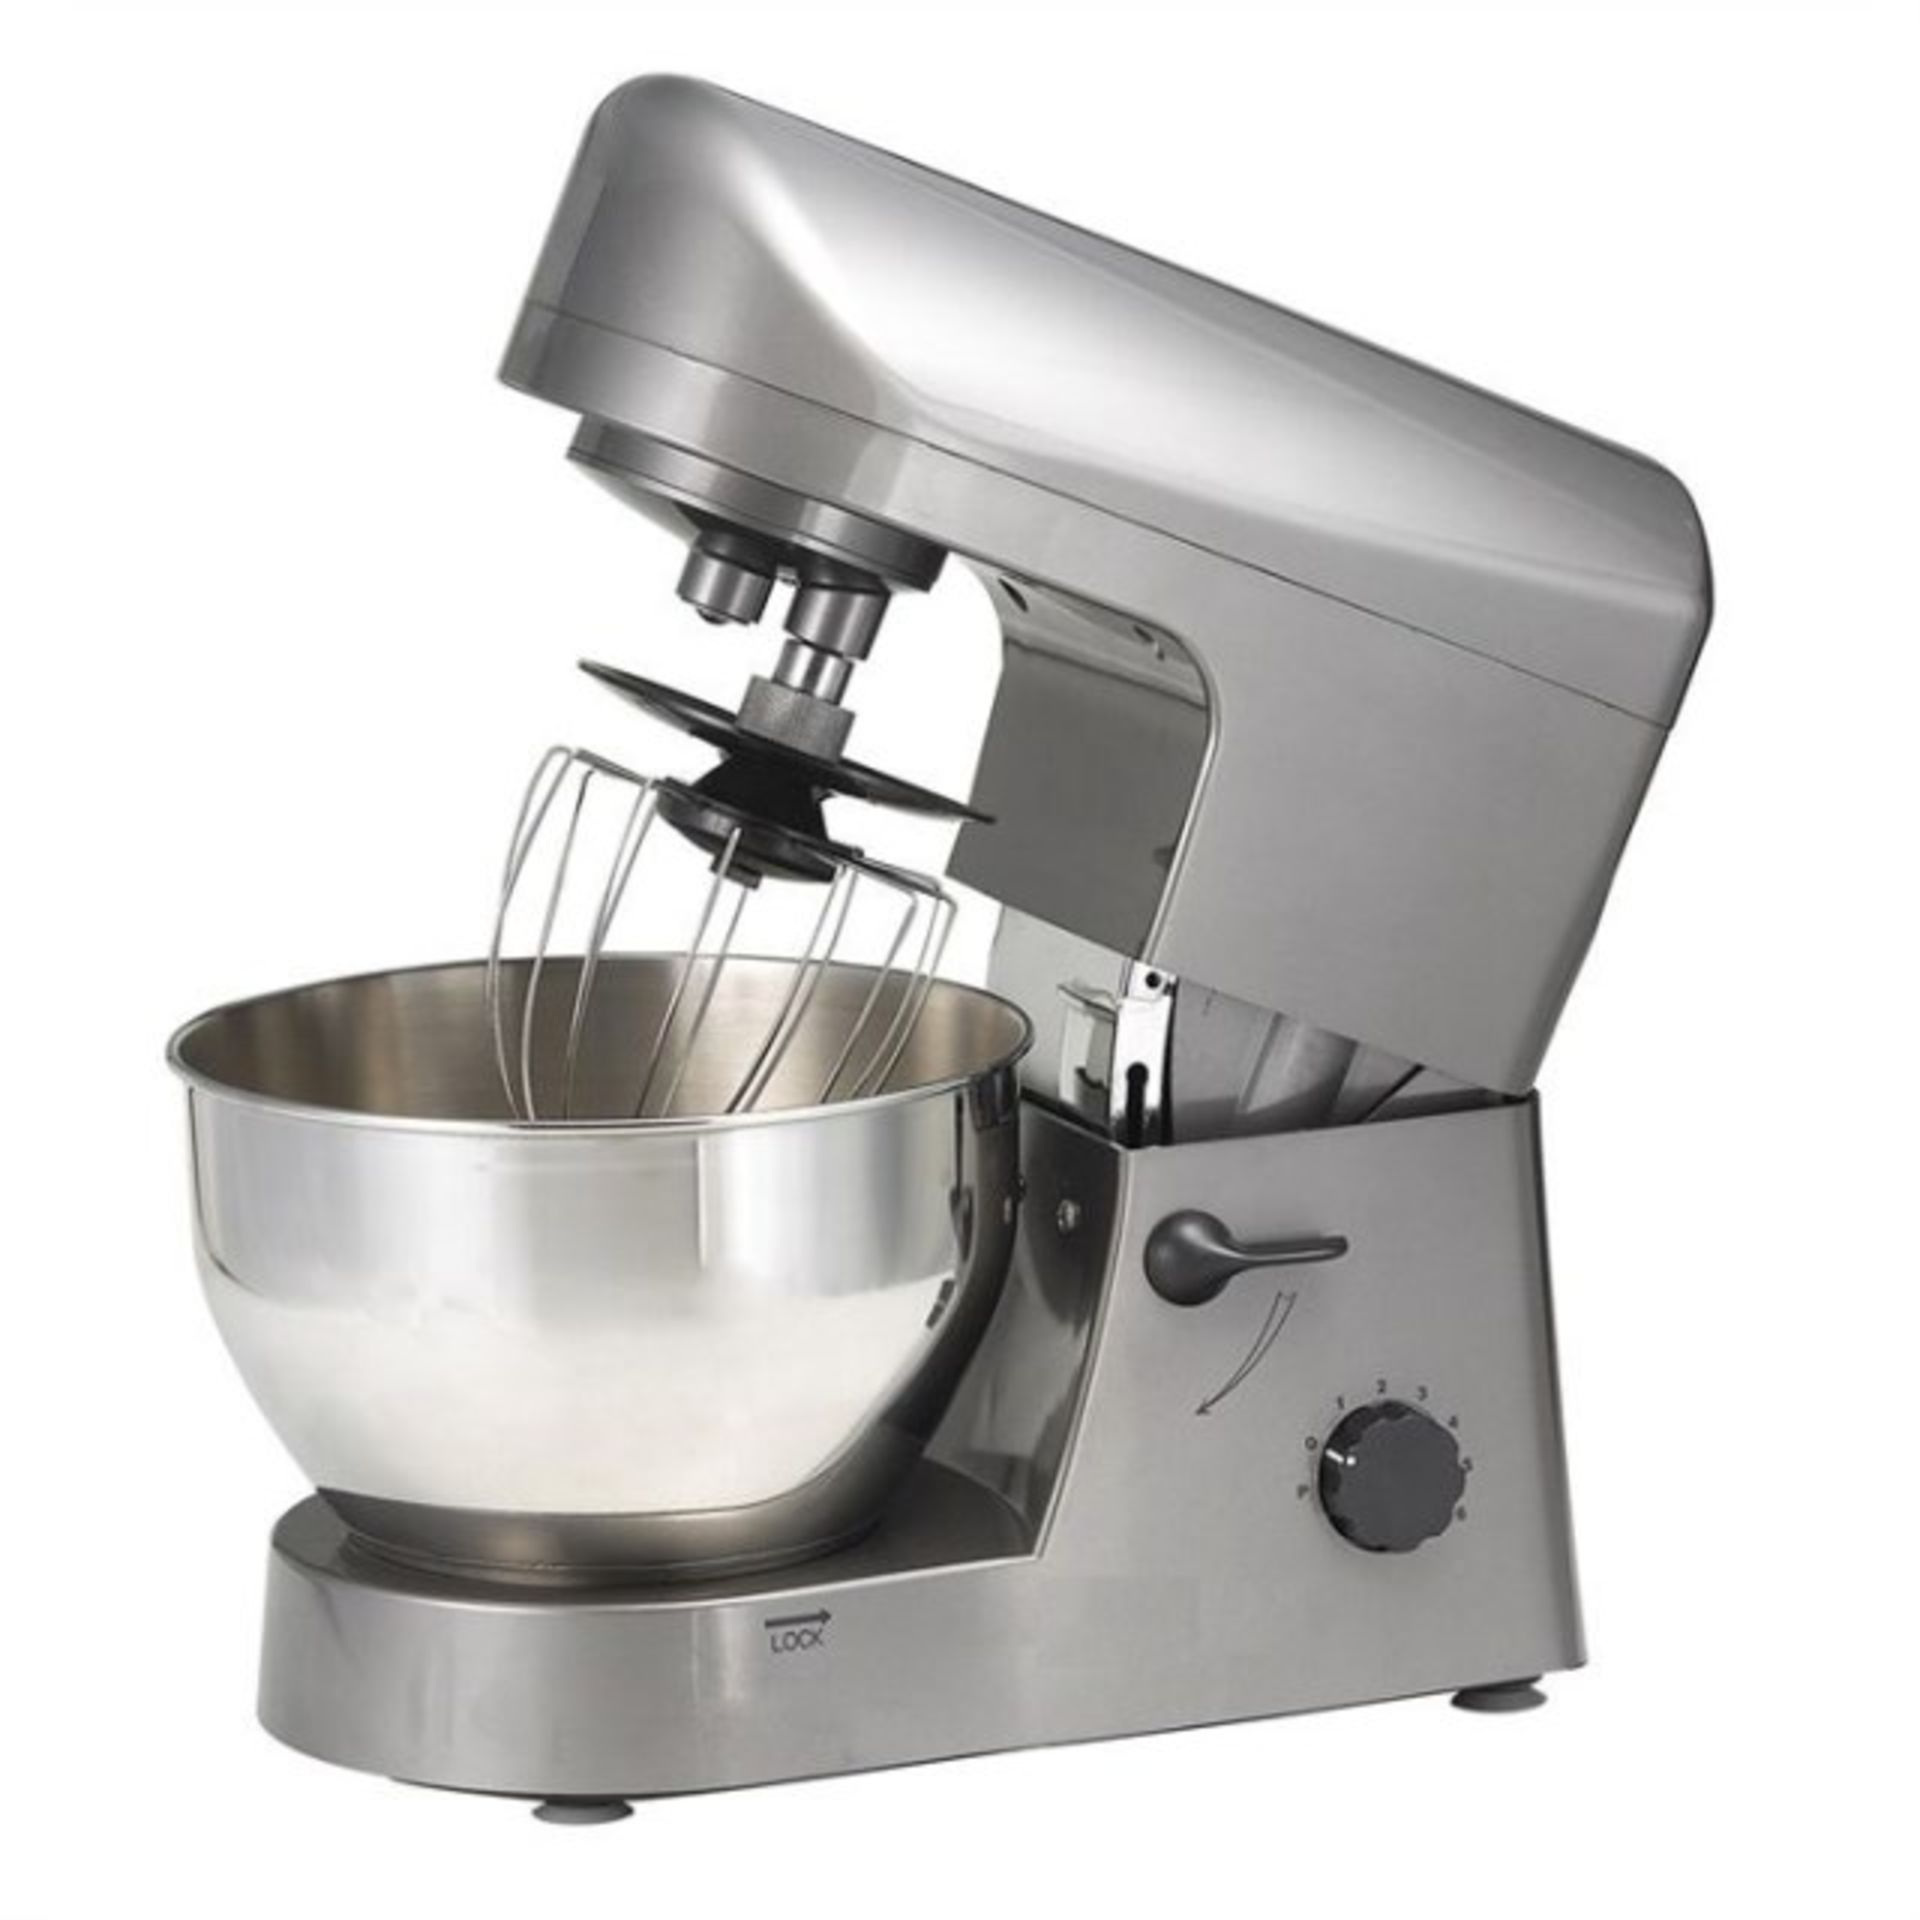 V Brand New Food Mixer With 5 Litre Bowl/Kneeding Hook/Whisk/Beater/Slip Resistant Feet/Six Speed